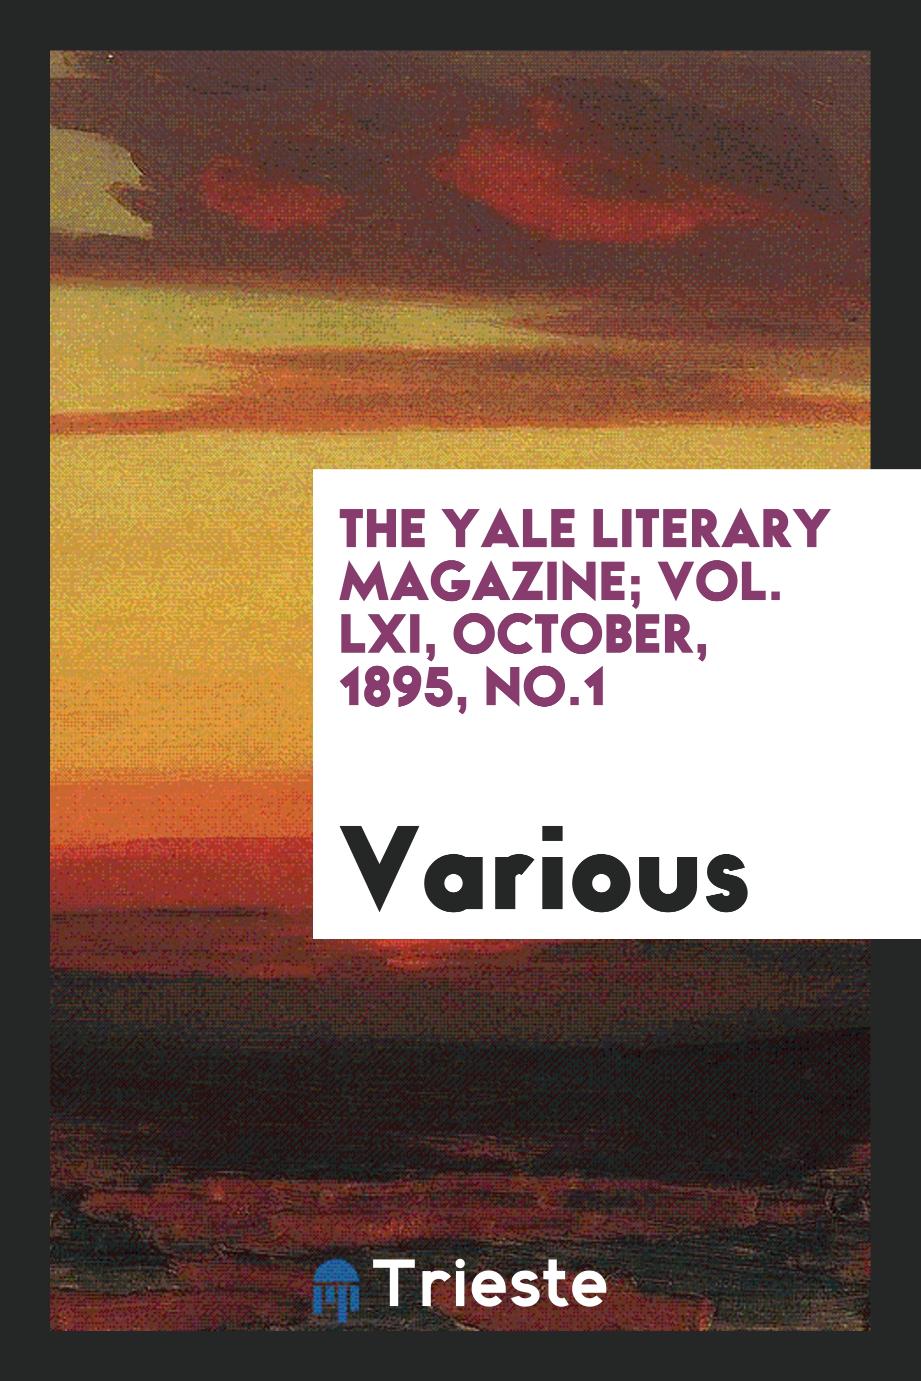 The Yale literary magazine; Vol. LXI, October, 1895, No.1